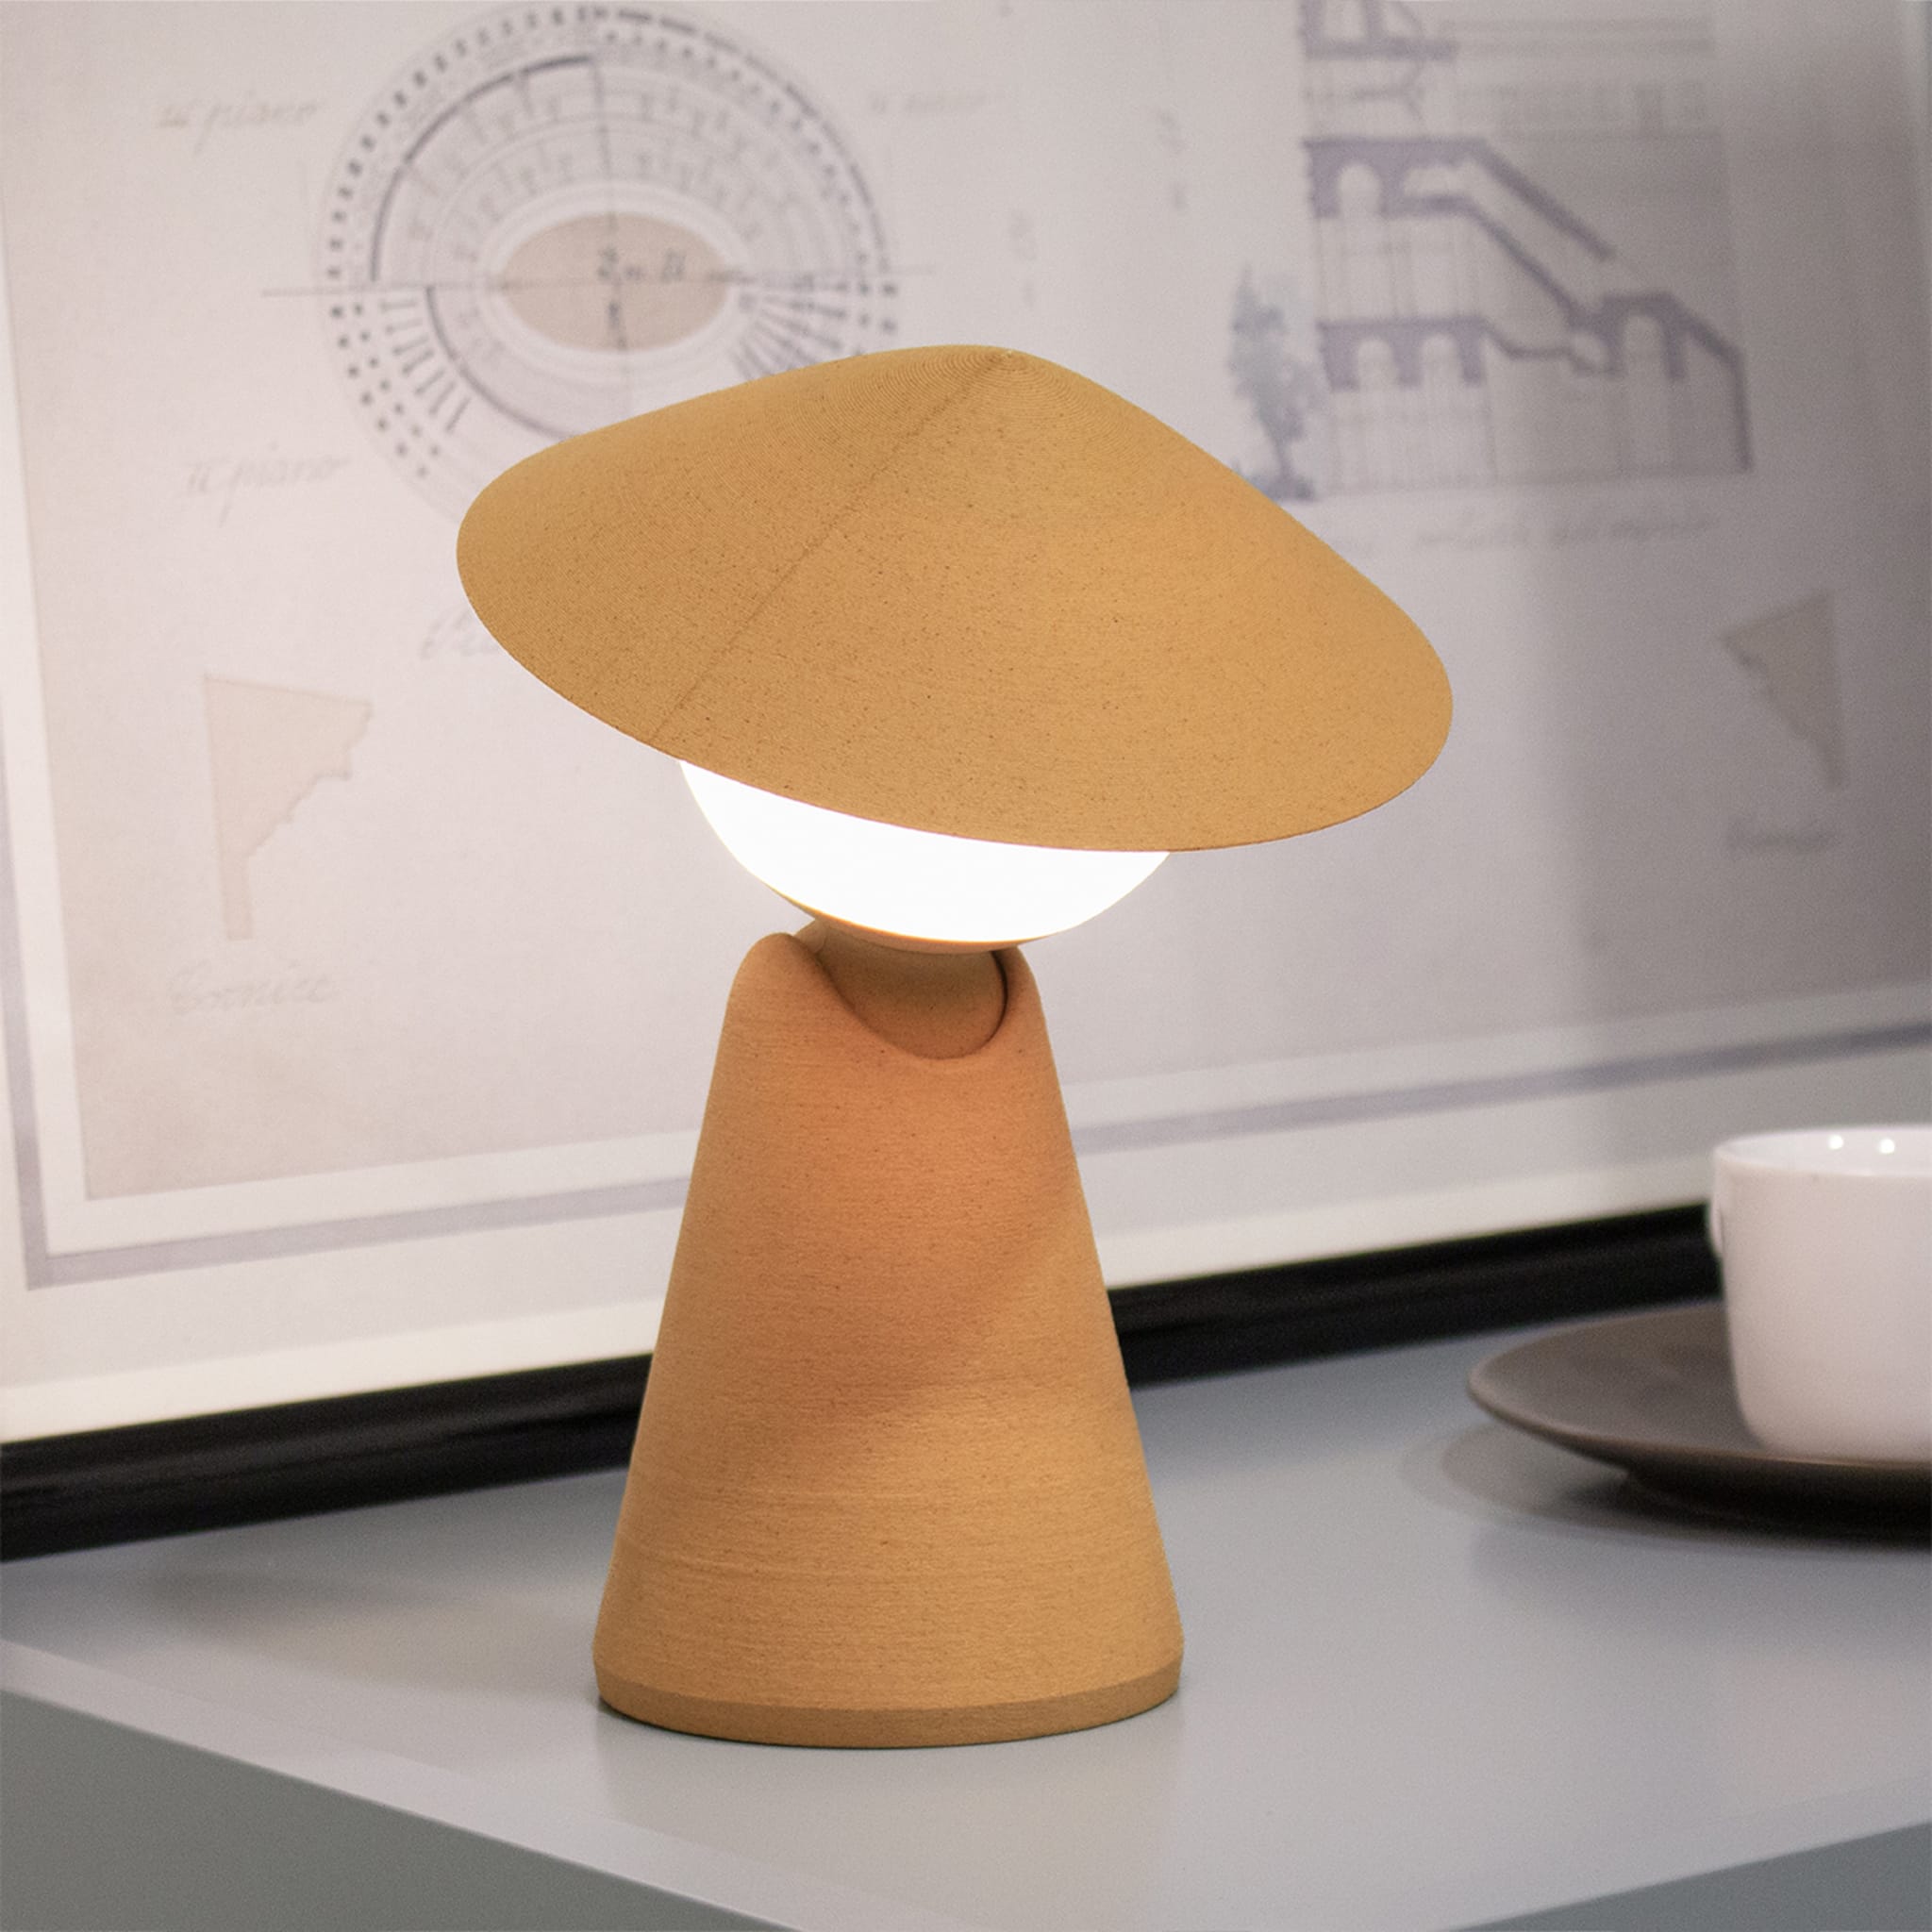 Puddy Birch Rechargeable Table Lamp by Albore Design - Alternative view 2